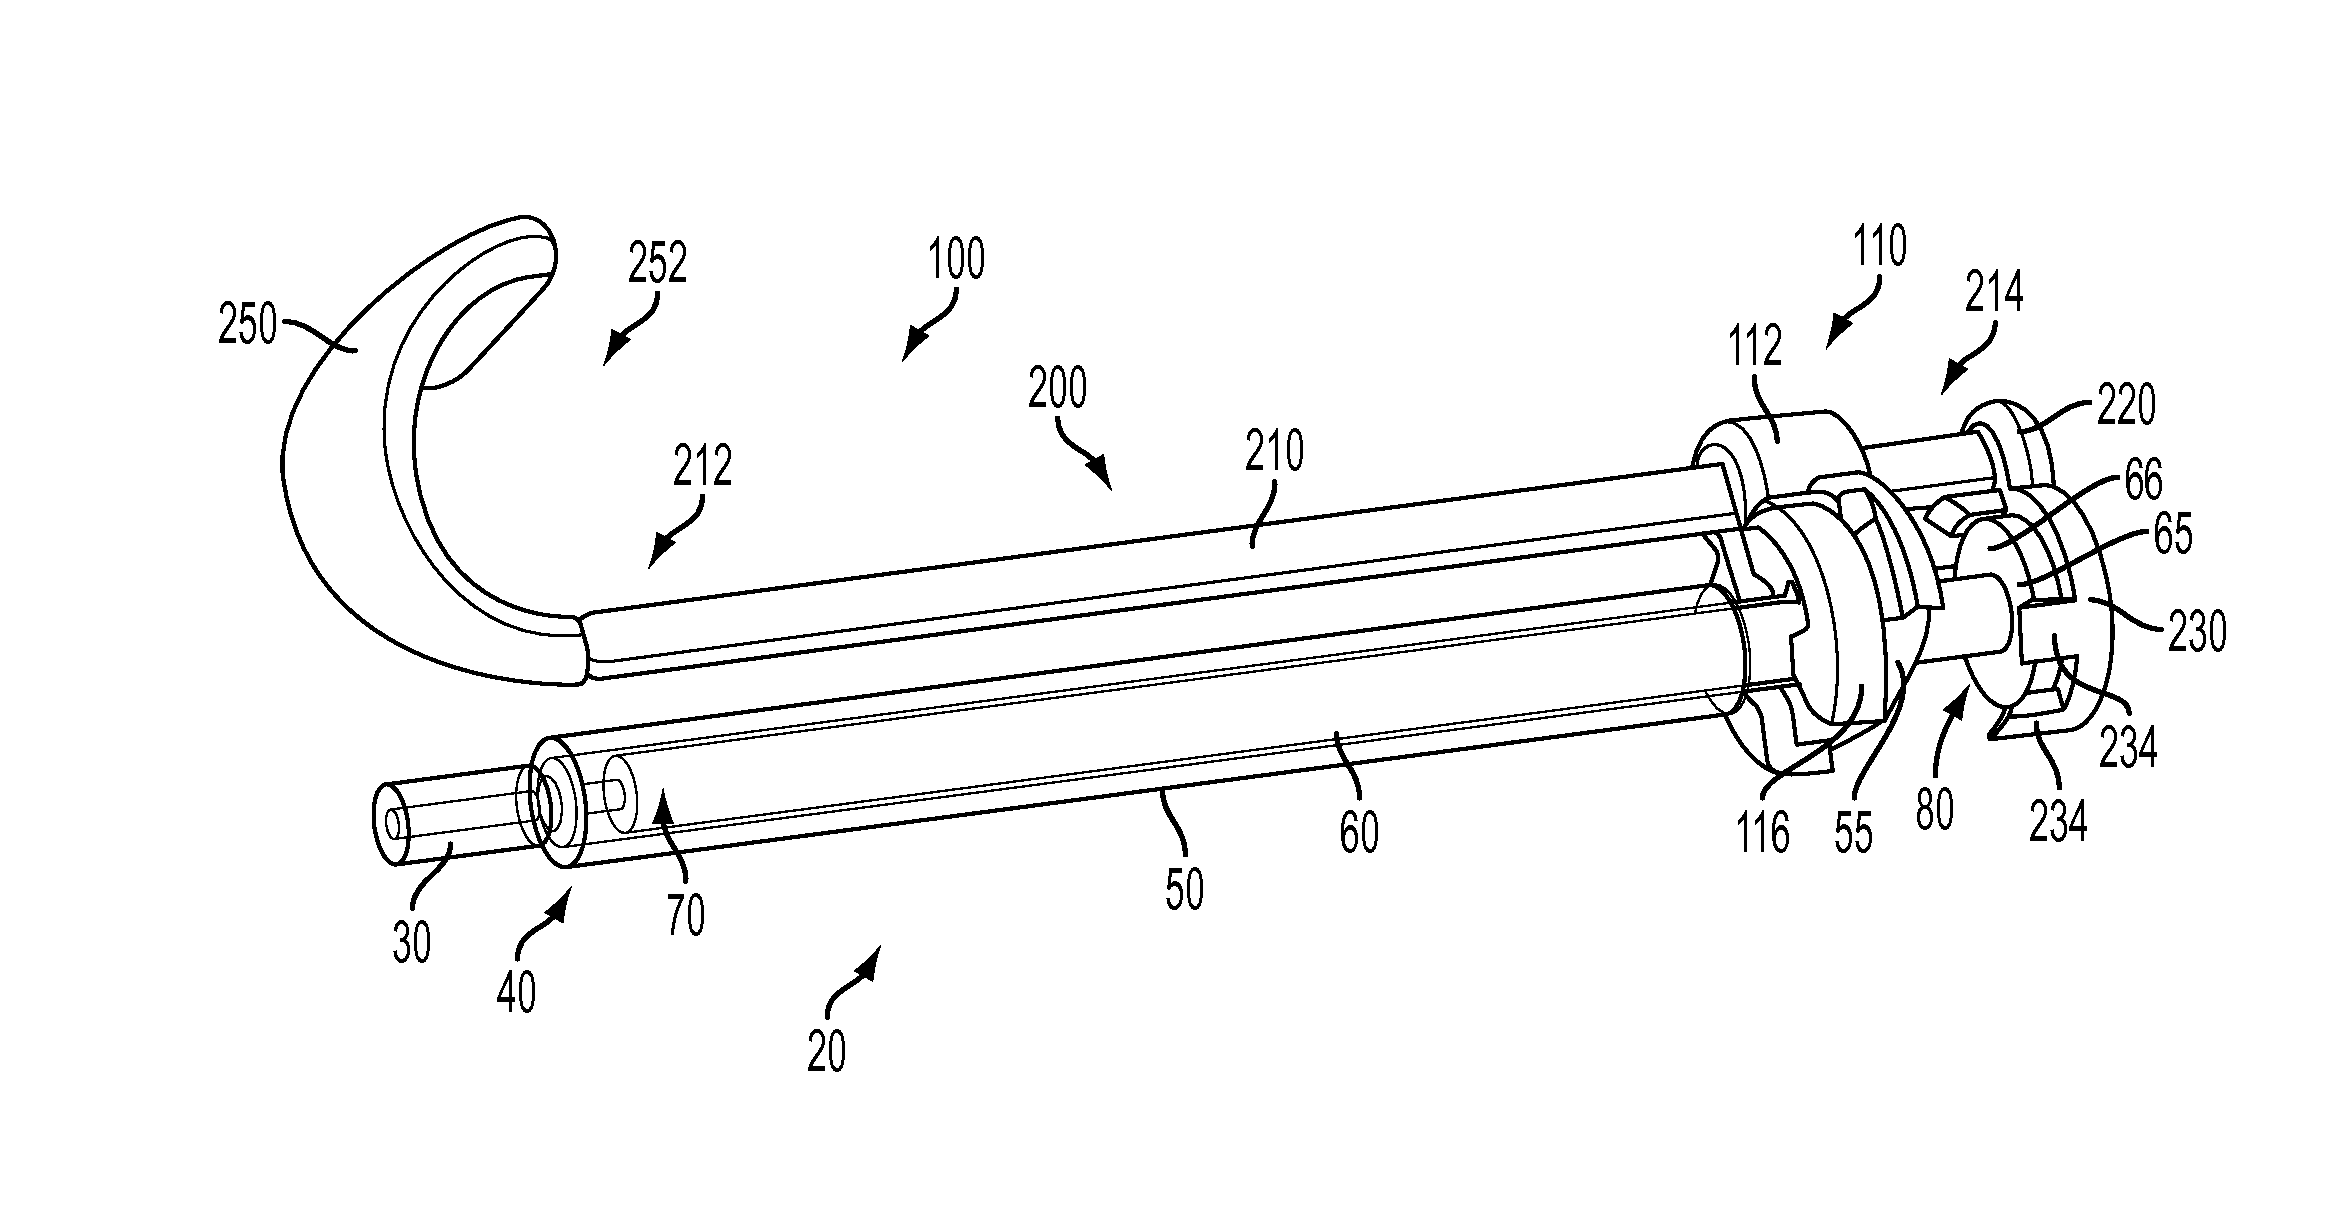 Plunger control device for a syringe and associated method